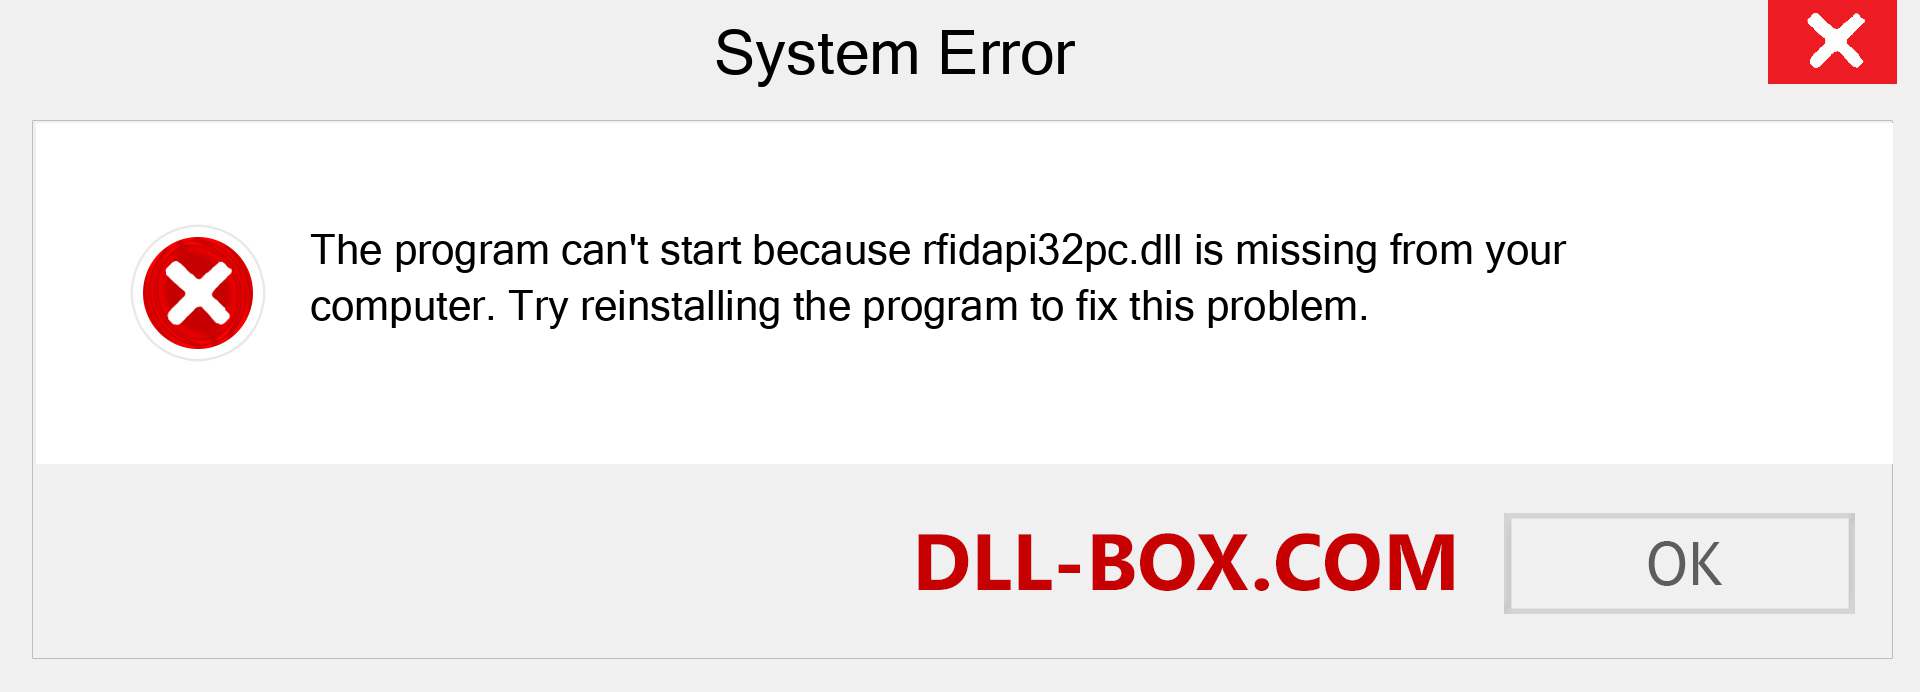  rfidapi32pc.dll file is missing?. Download for Windows 7, 8, 10 - Fix  rfidapi32pc dll Missing Error on Windows, photos, images